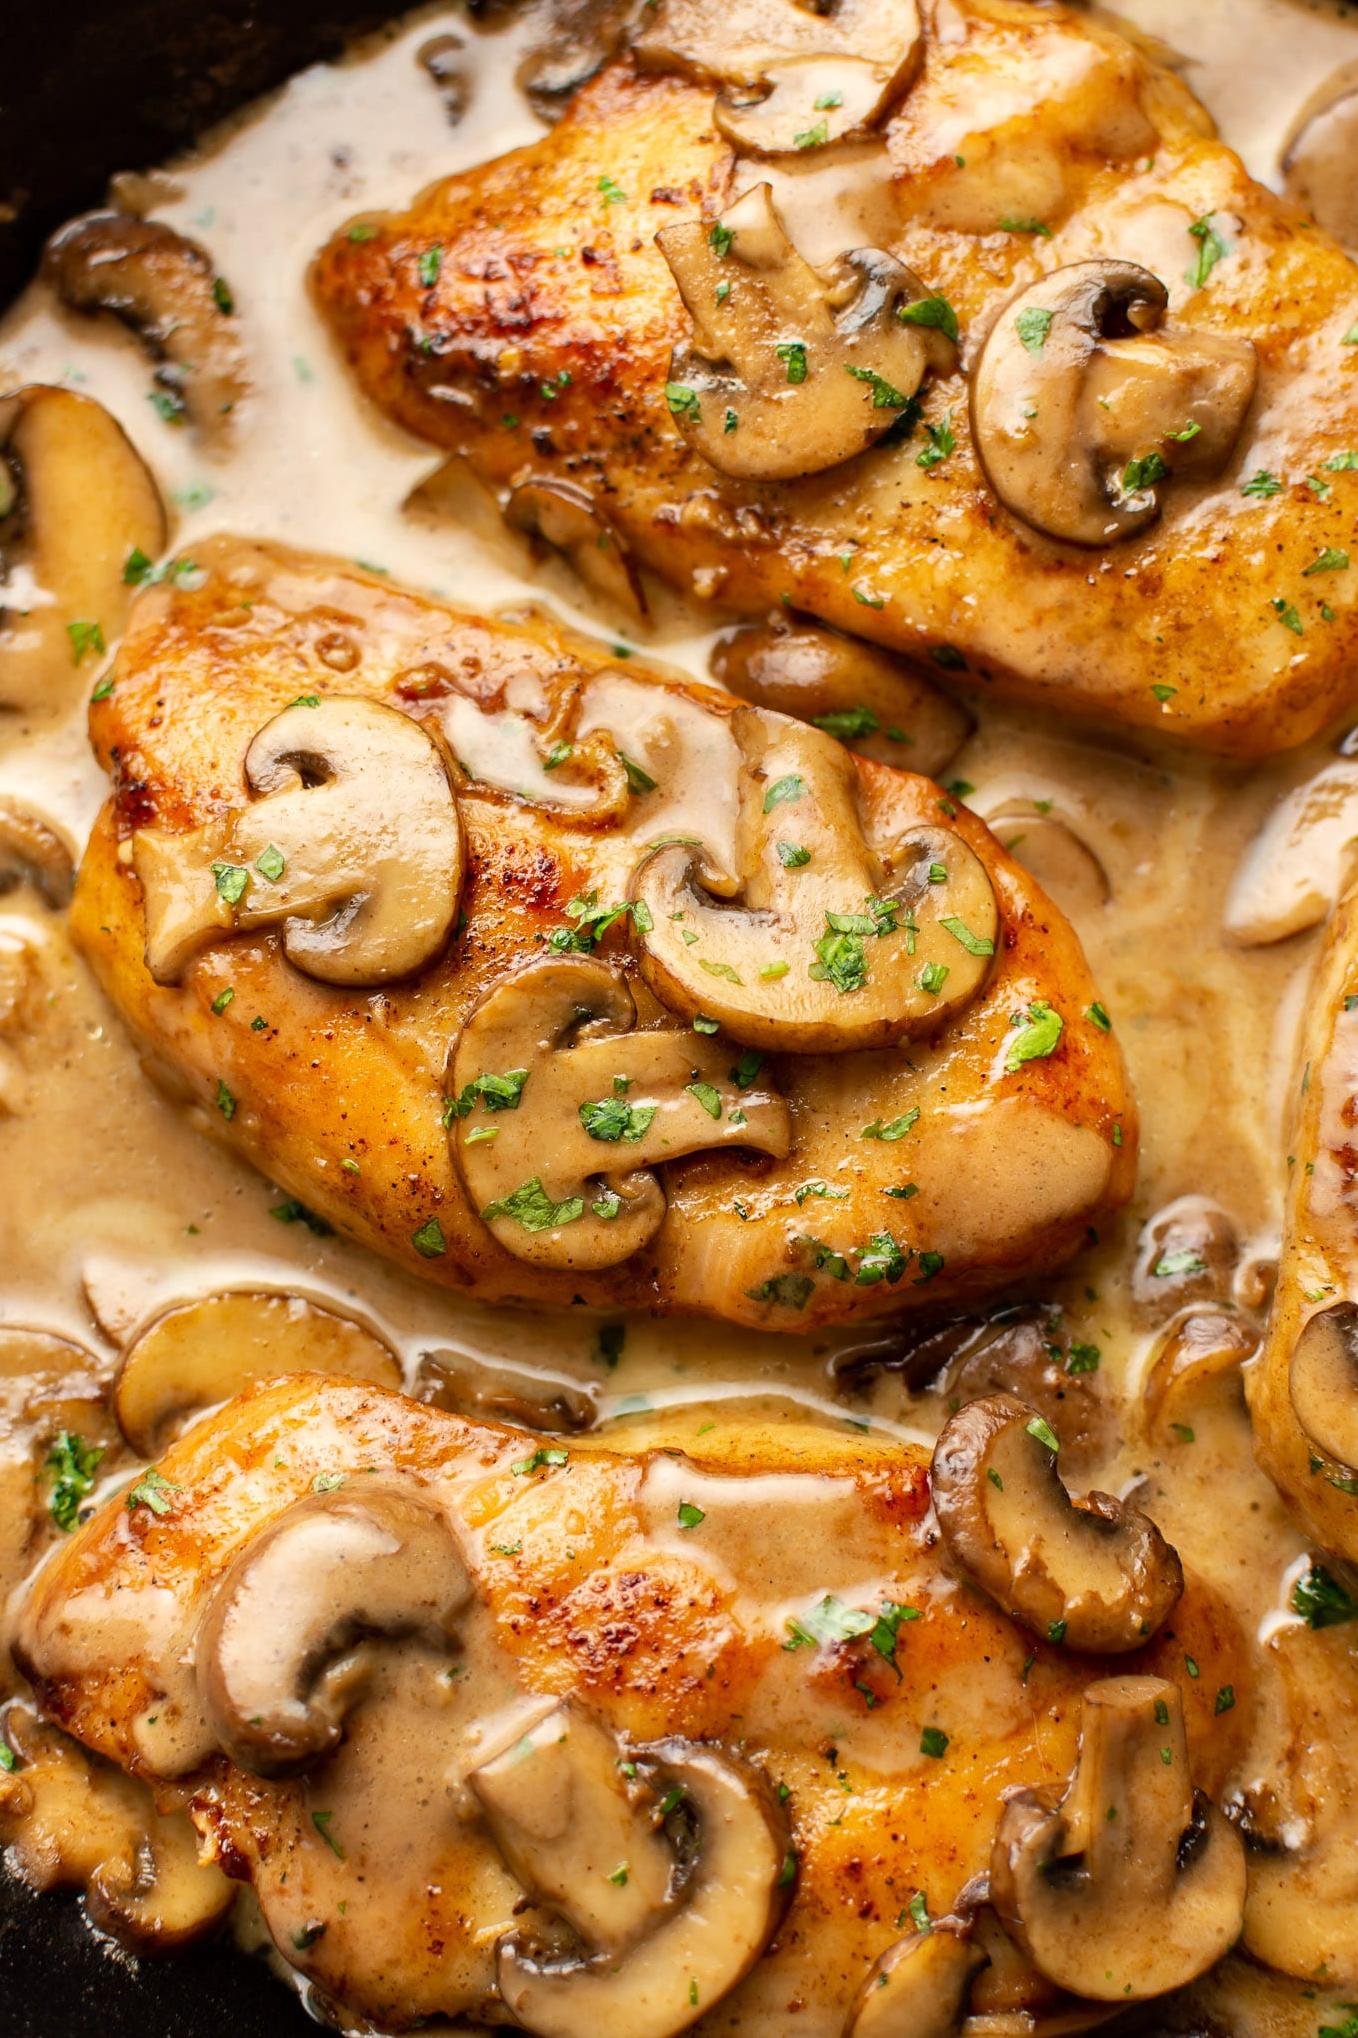  Cozy dinner vibes with chicken in marsala wine sauce